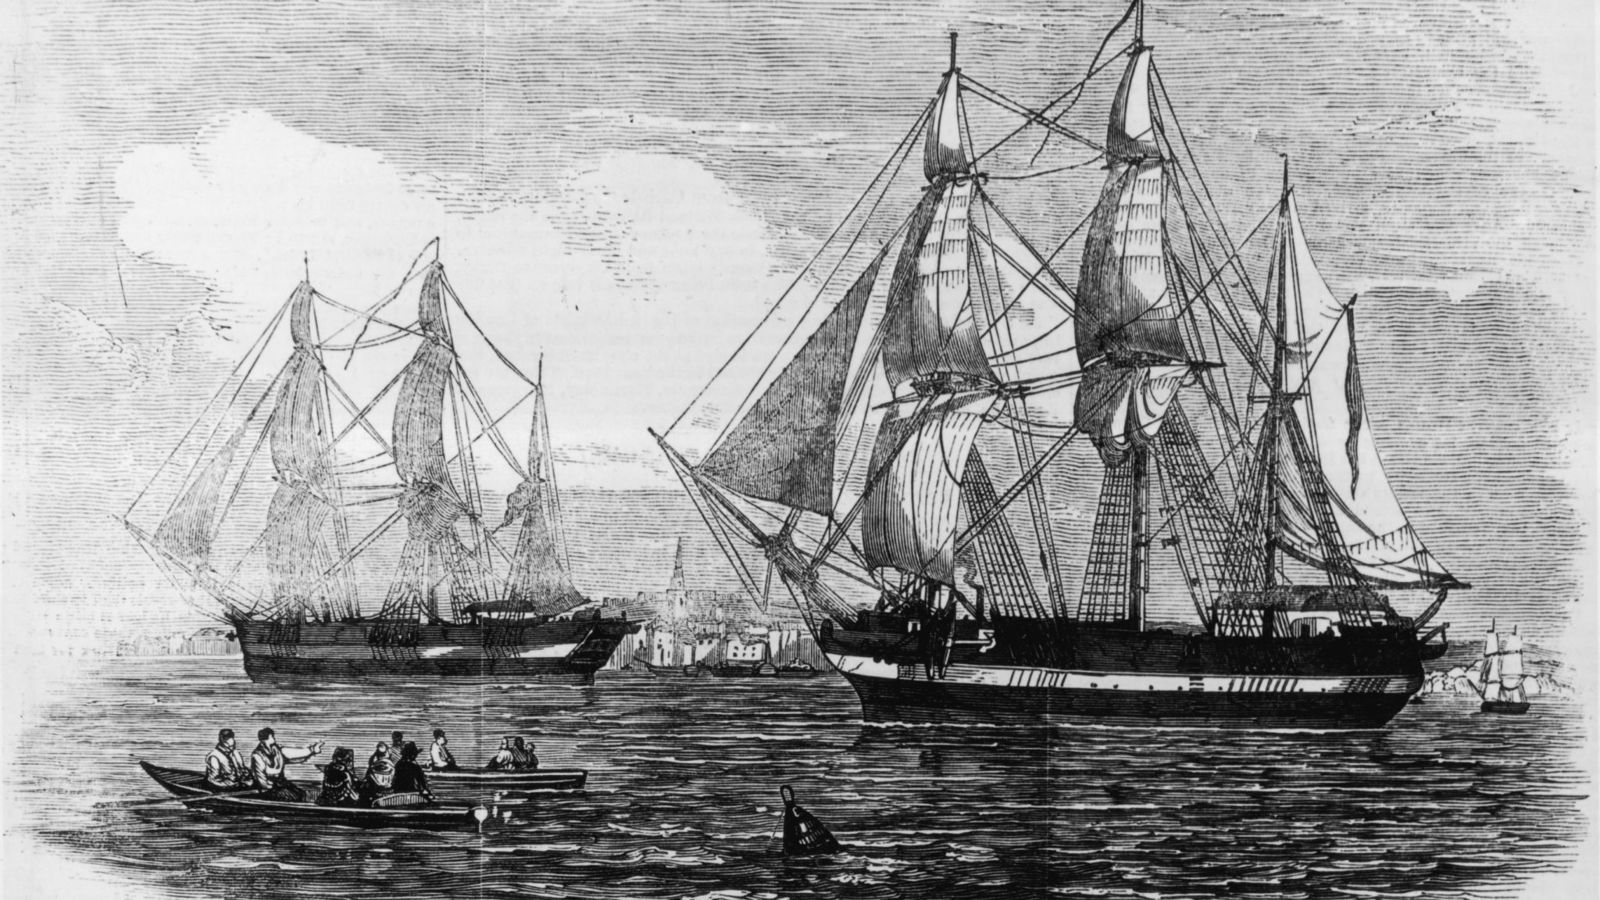 1845: The ships HMS Erebus and HMS Terror used in Sir John Franklin's ill-fated attempt to discover the Northwest passage. Original Publication: Illustrated London News pub 24th May 1845 (Photo by Illustrated London News/Getty Images)